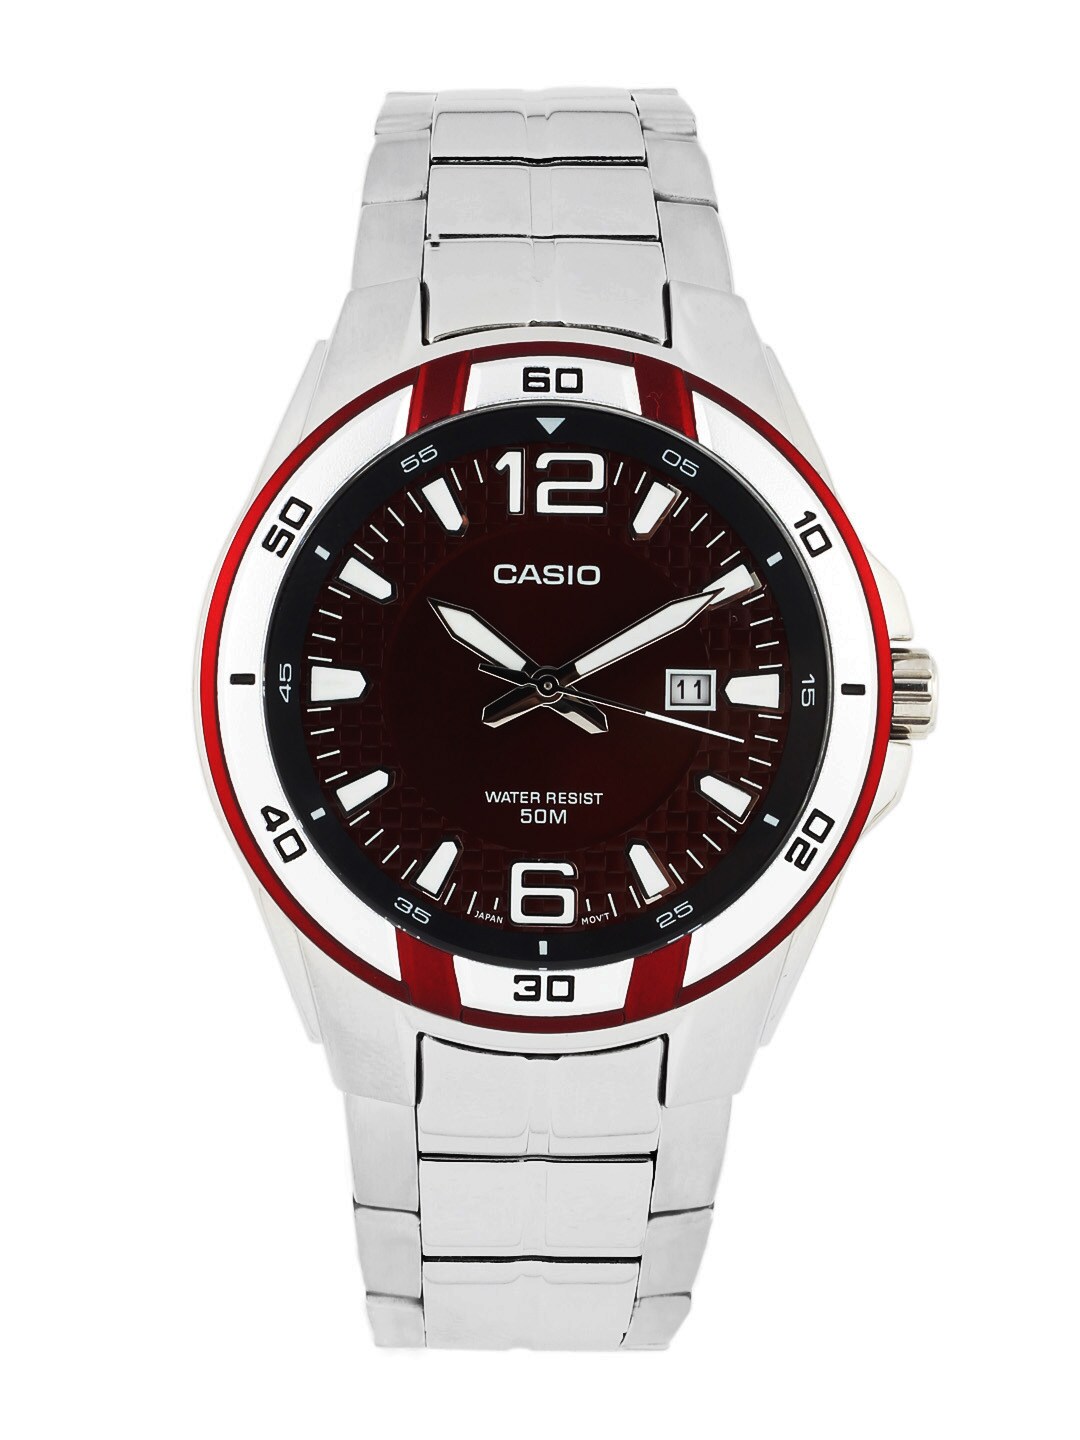 CASIO ENTICER Men Maroon Dial Analogue Watch A518